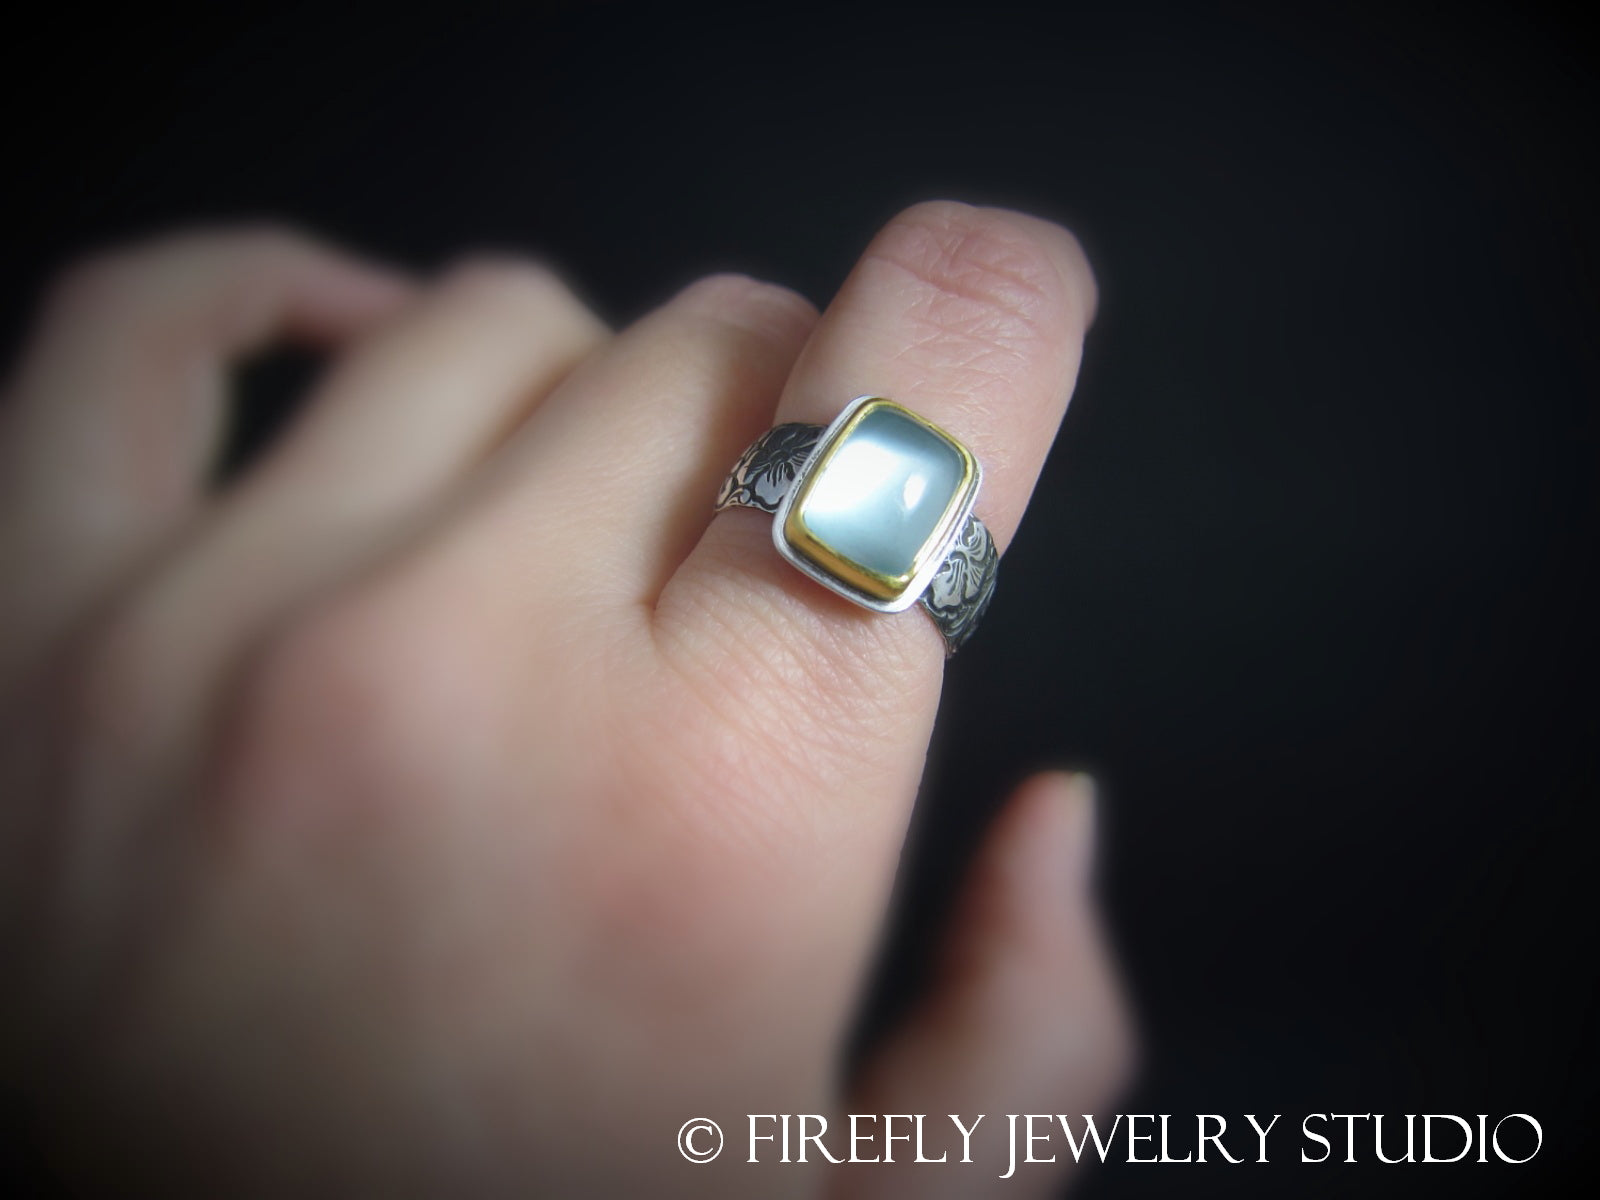 Aquamarine Ring in 24k Yellow Gold and Sterling. Size 8 - Firefly Jewelry Studio